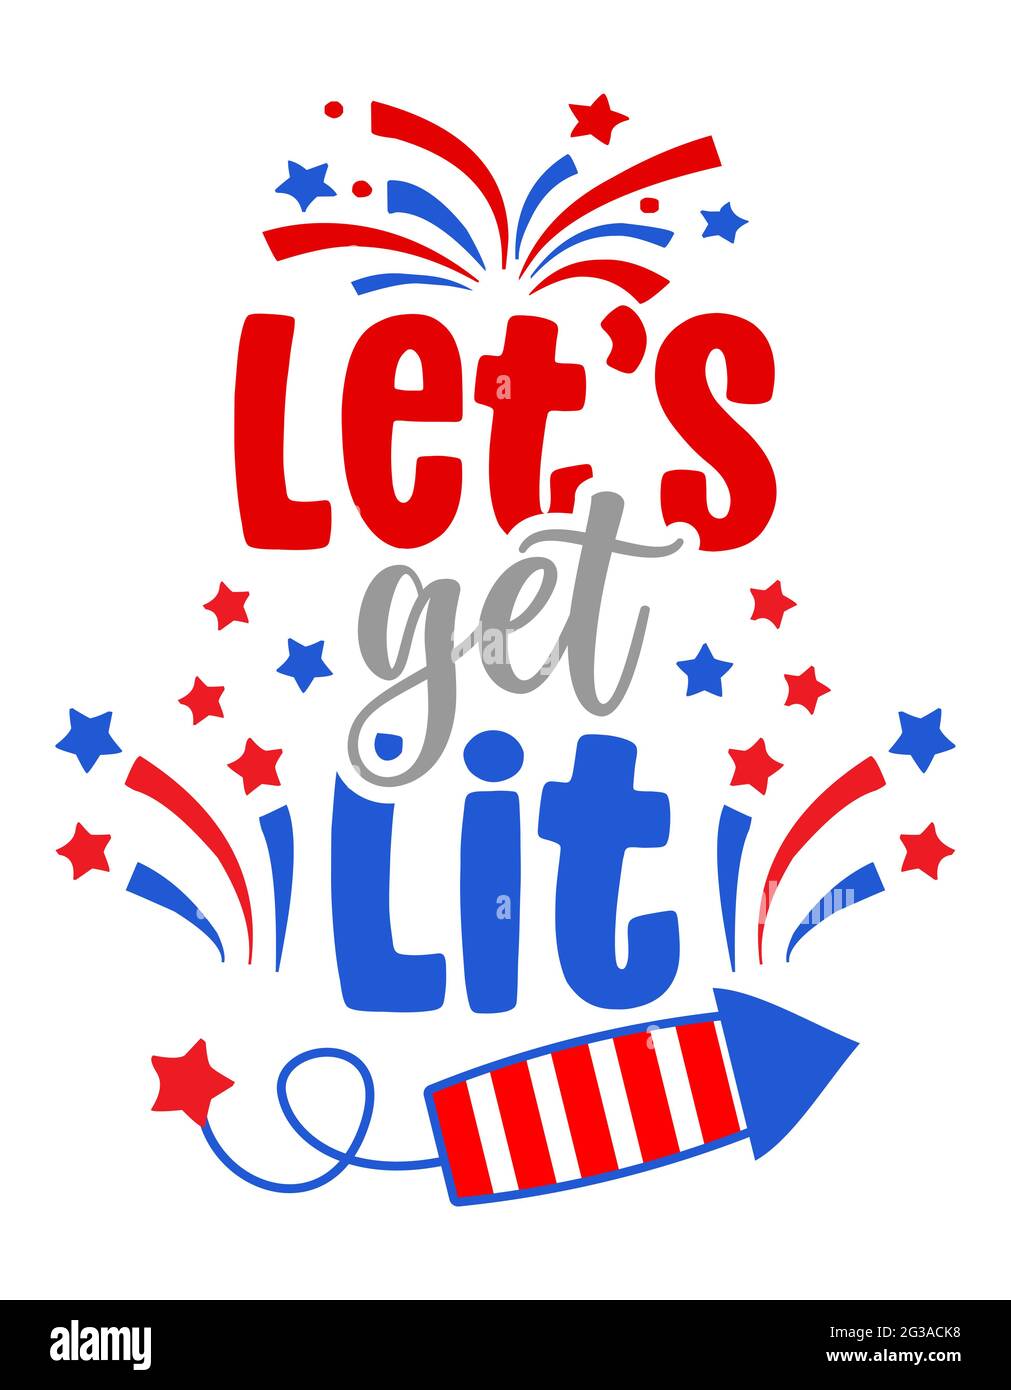 Let's get Lit - Independence Day USA with motivational text. Good for T-shirts, Happy july 4th. Independence Day USA holiday. Holiday Quote. Stock Vector